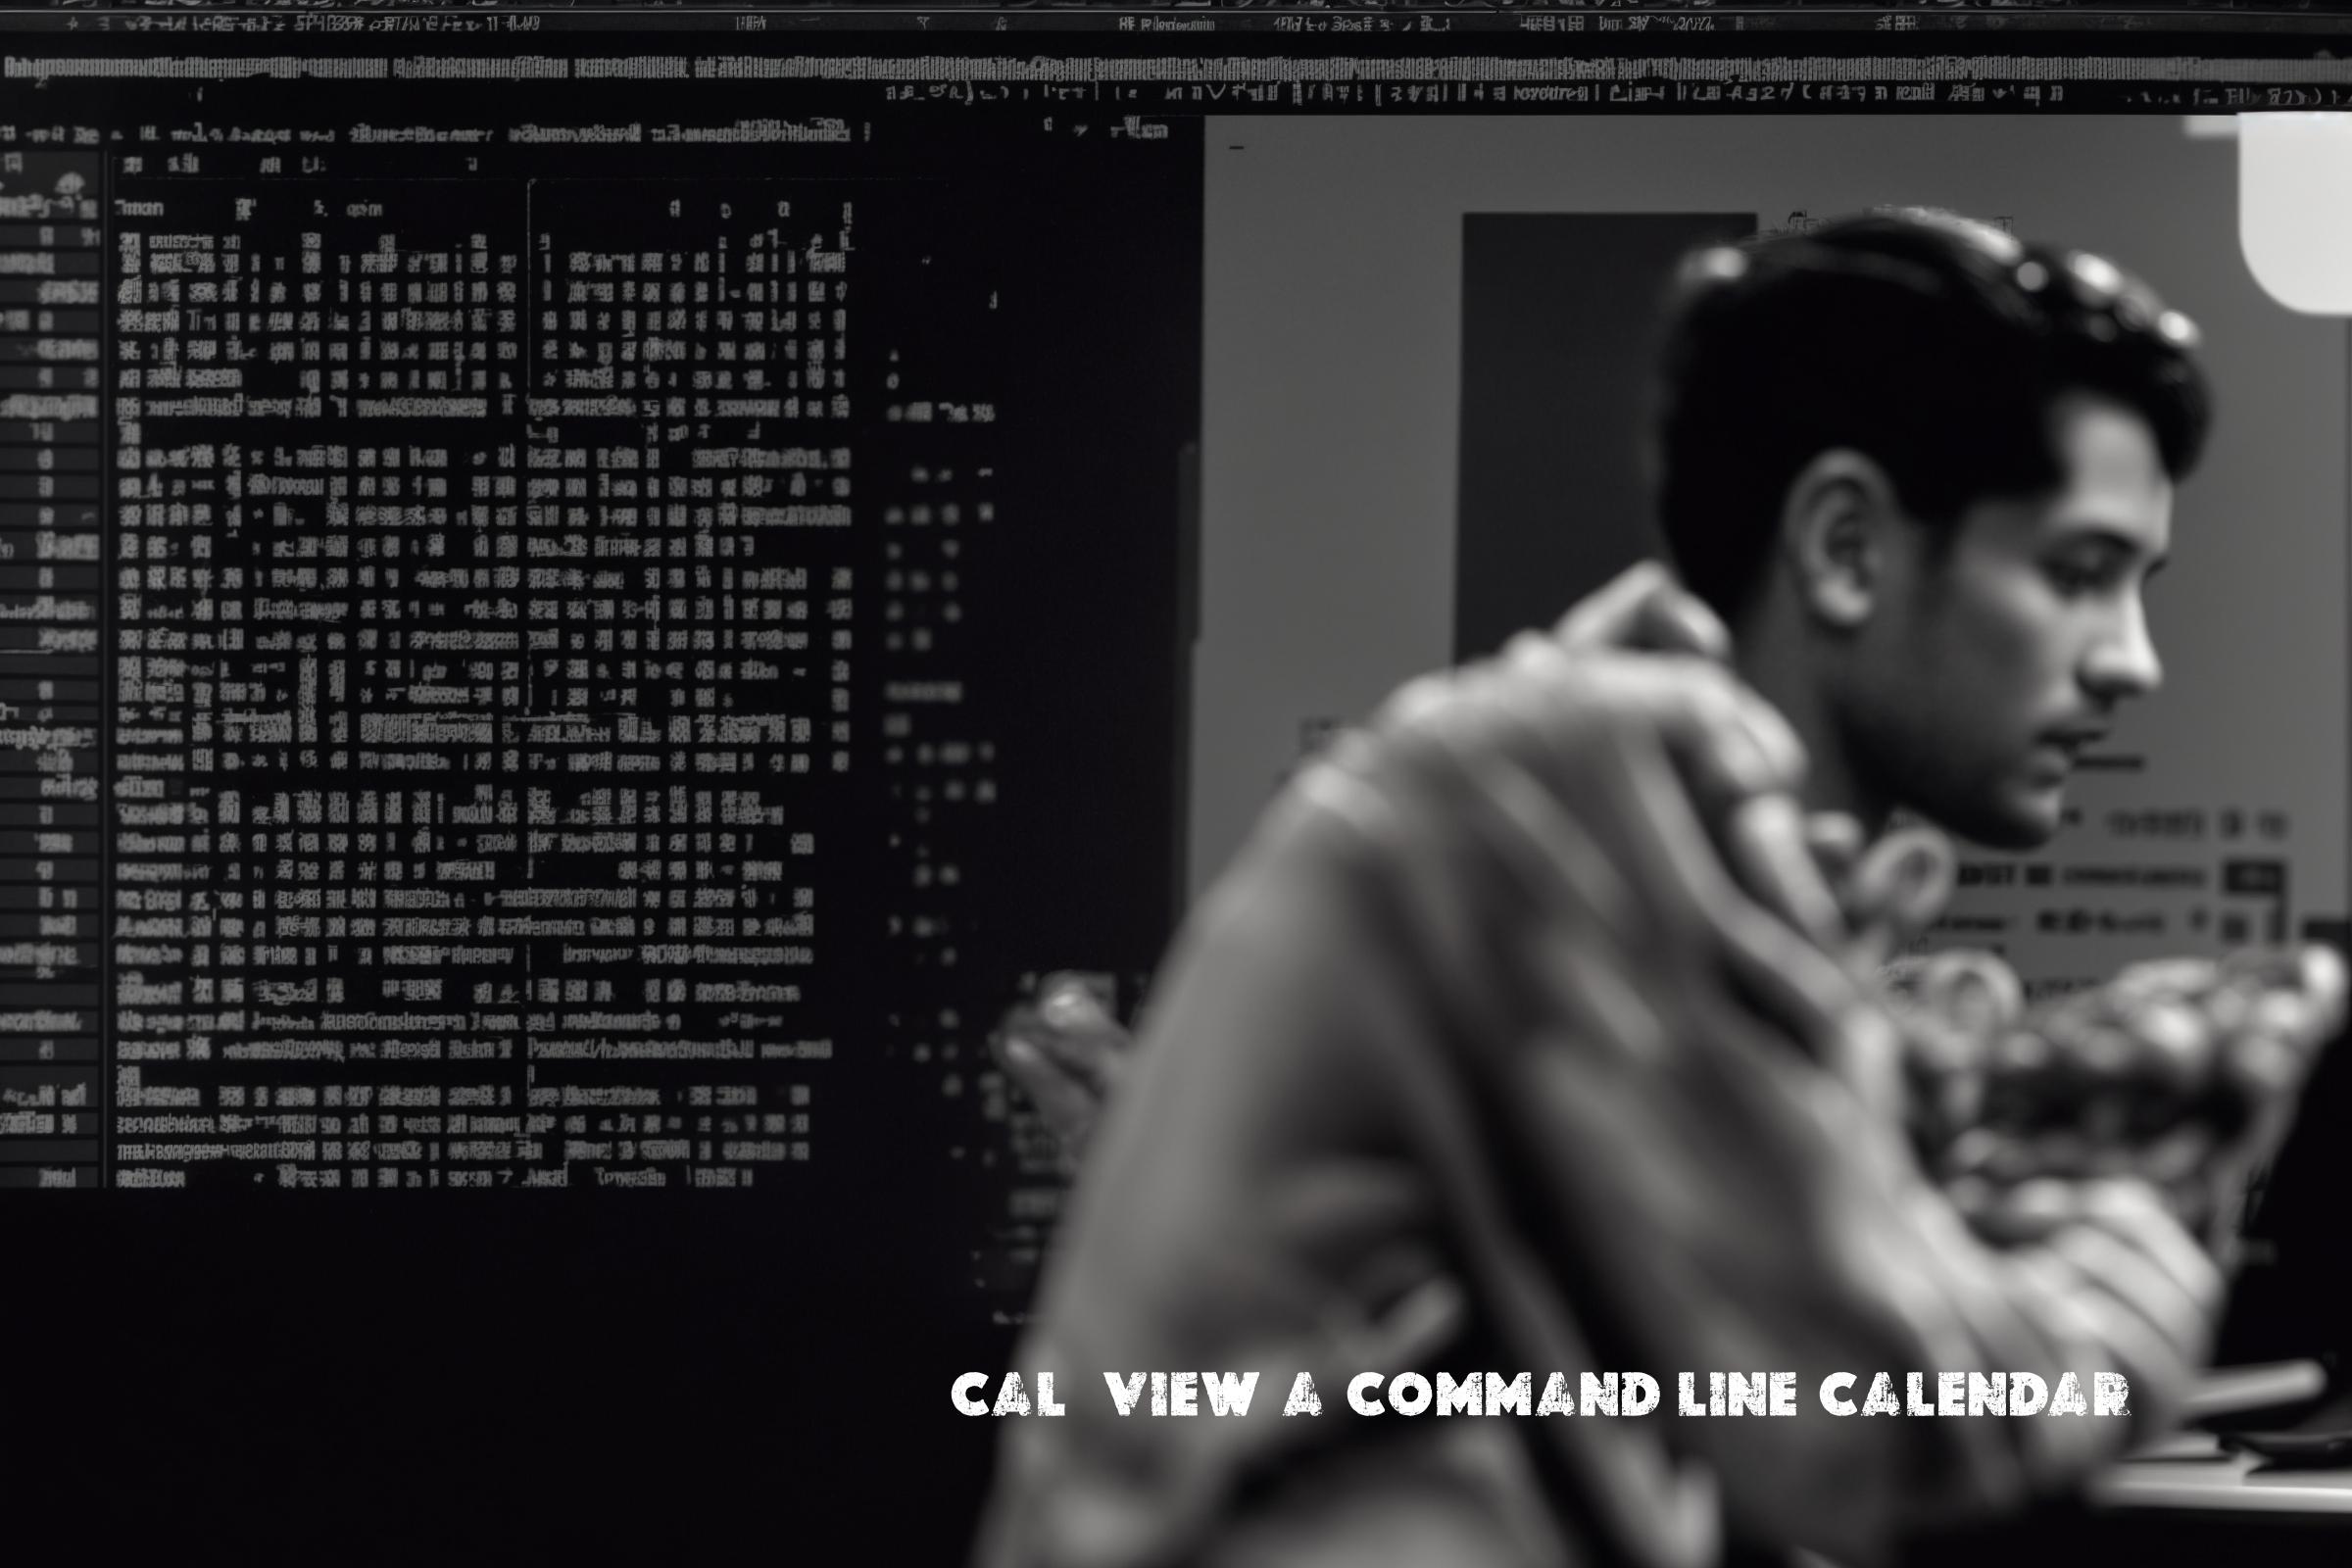 Introduction to cal (View a command-line calendar)